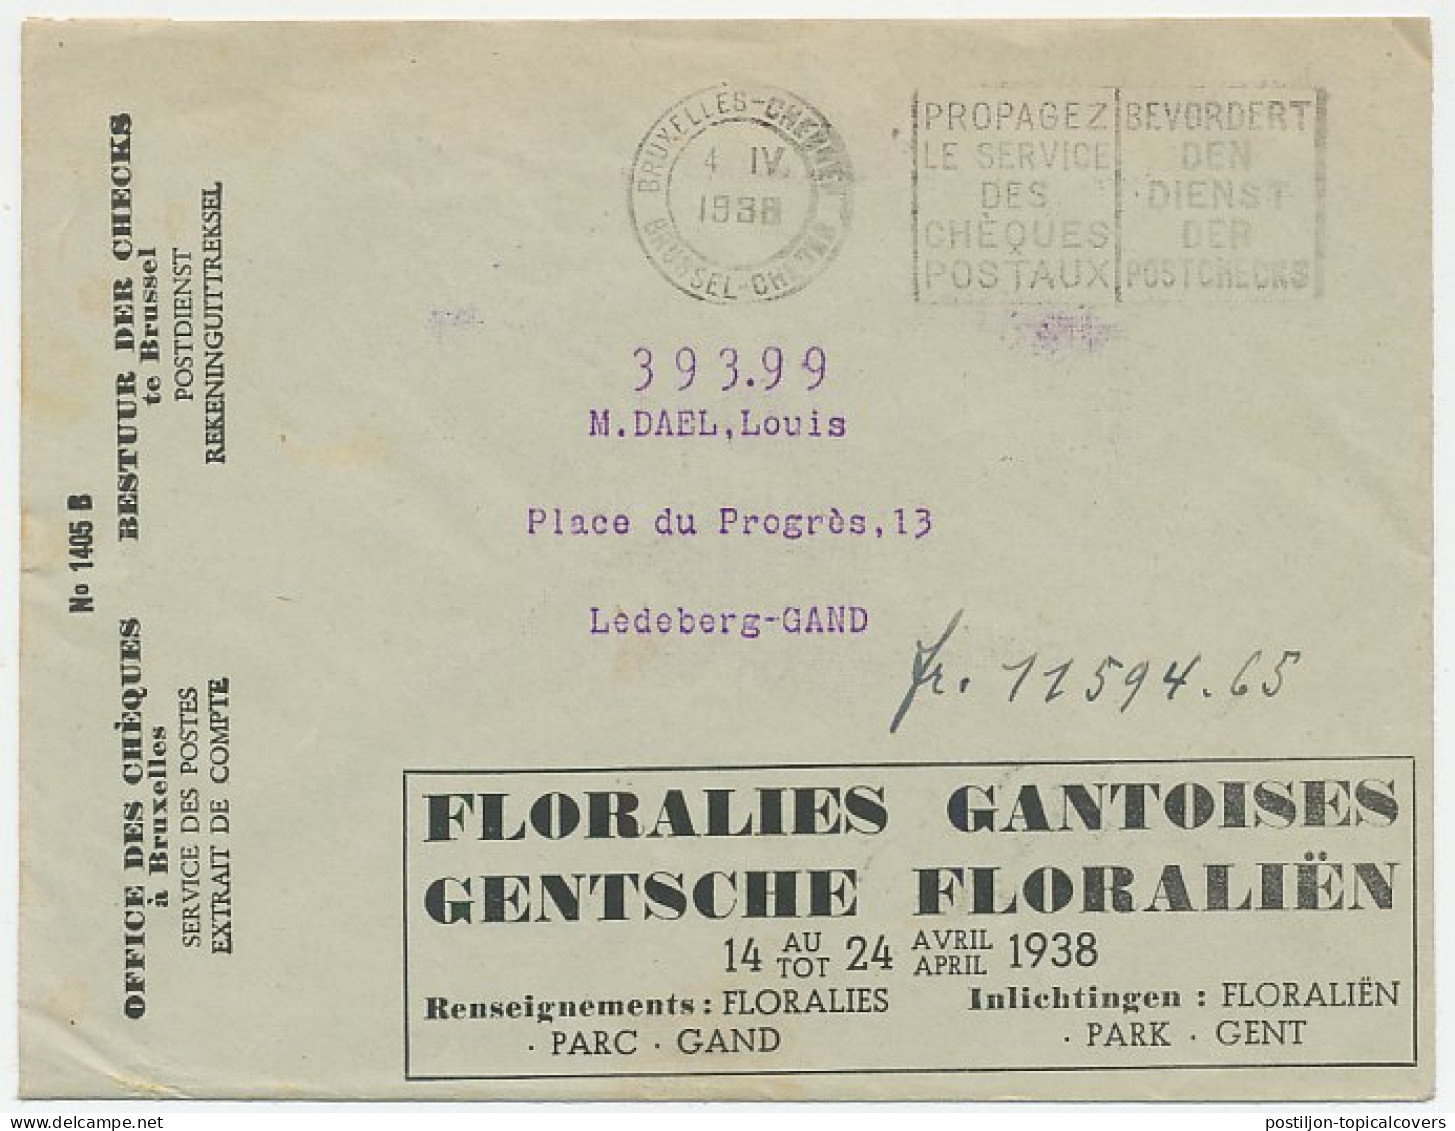 Postal Cheque Cover Belgium 1938 Flower Exhibition - Ghent Flower Show - Trees